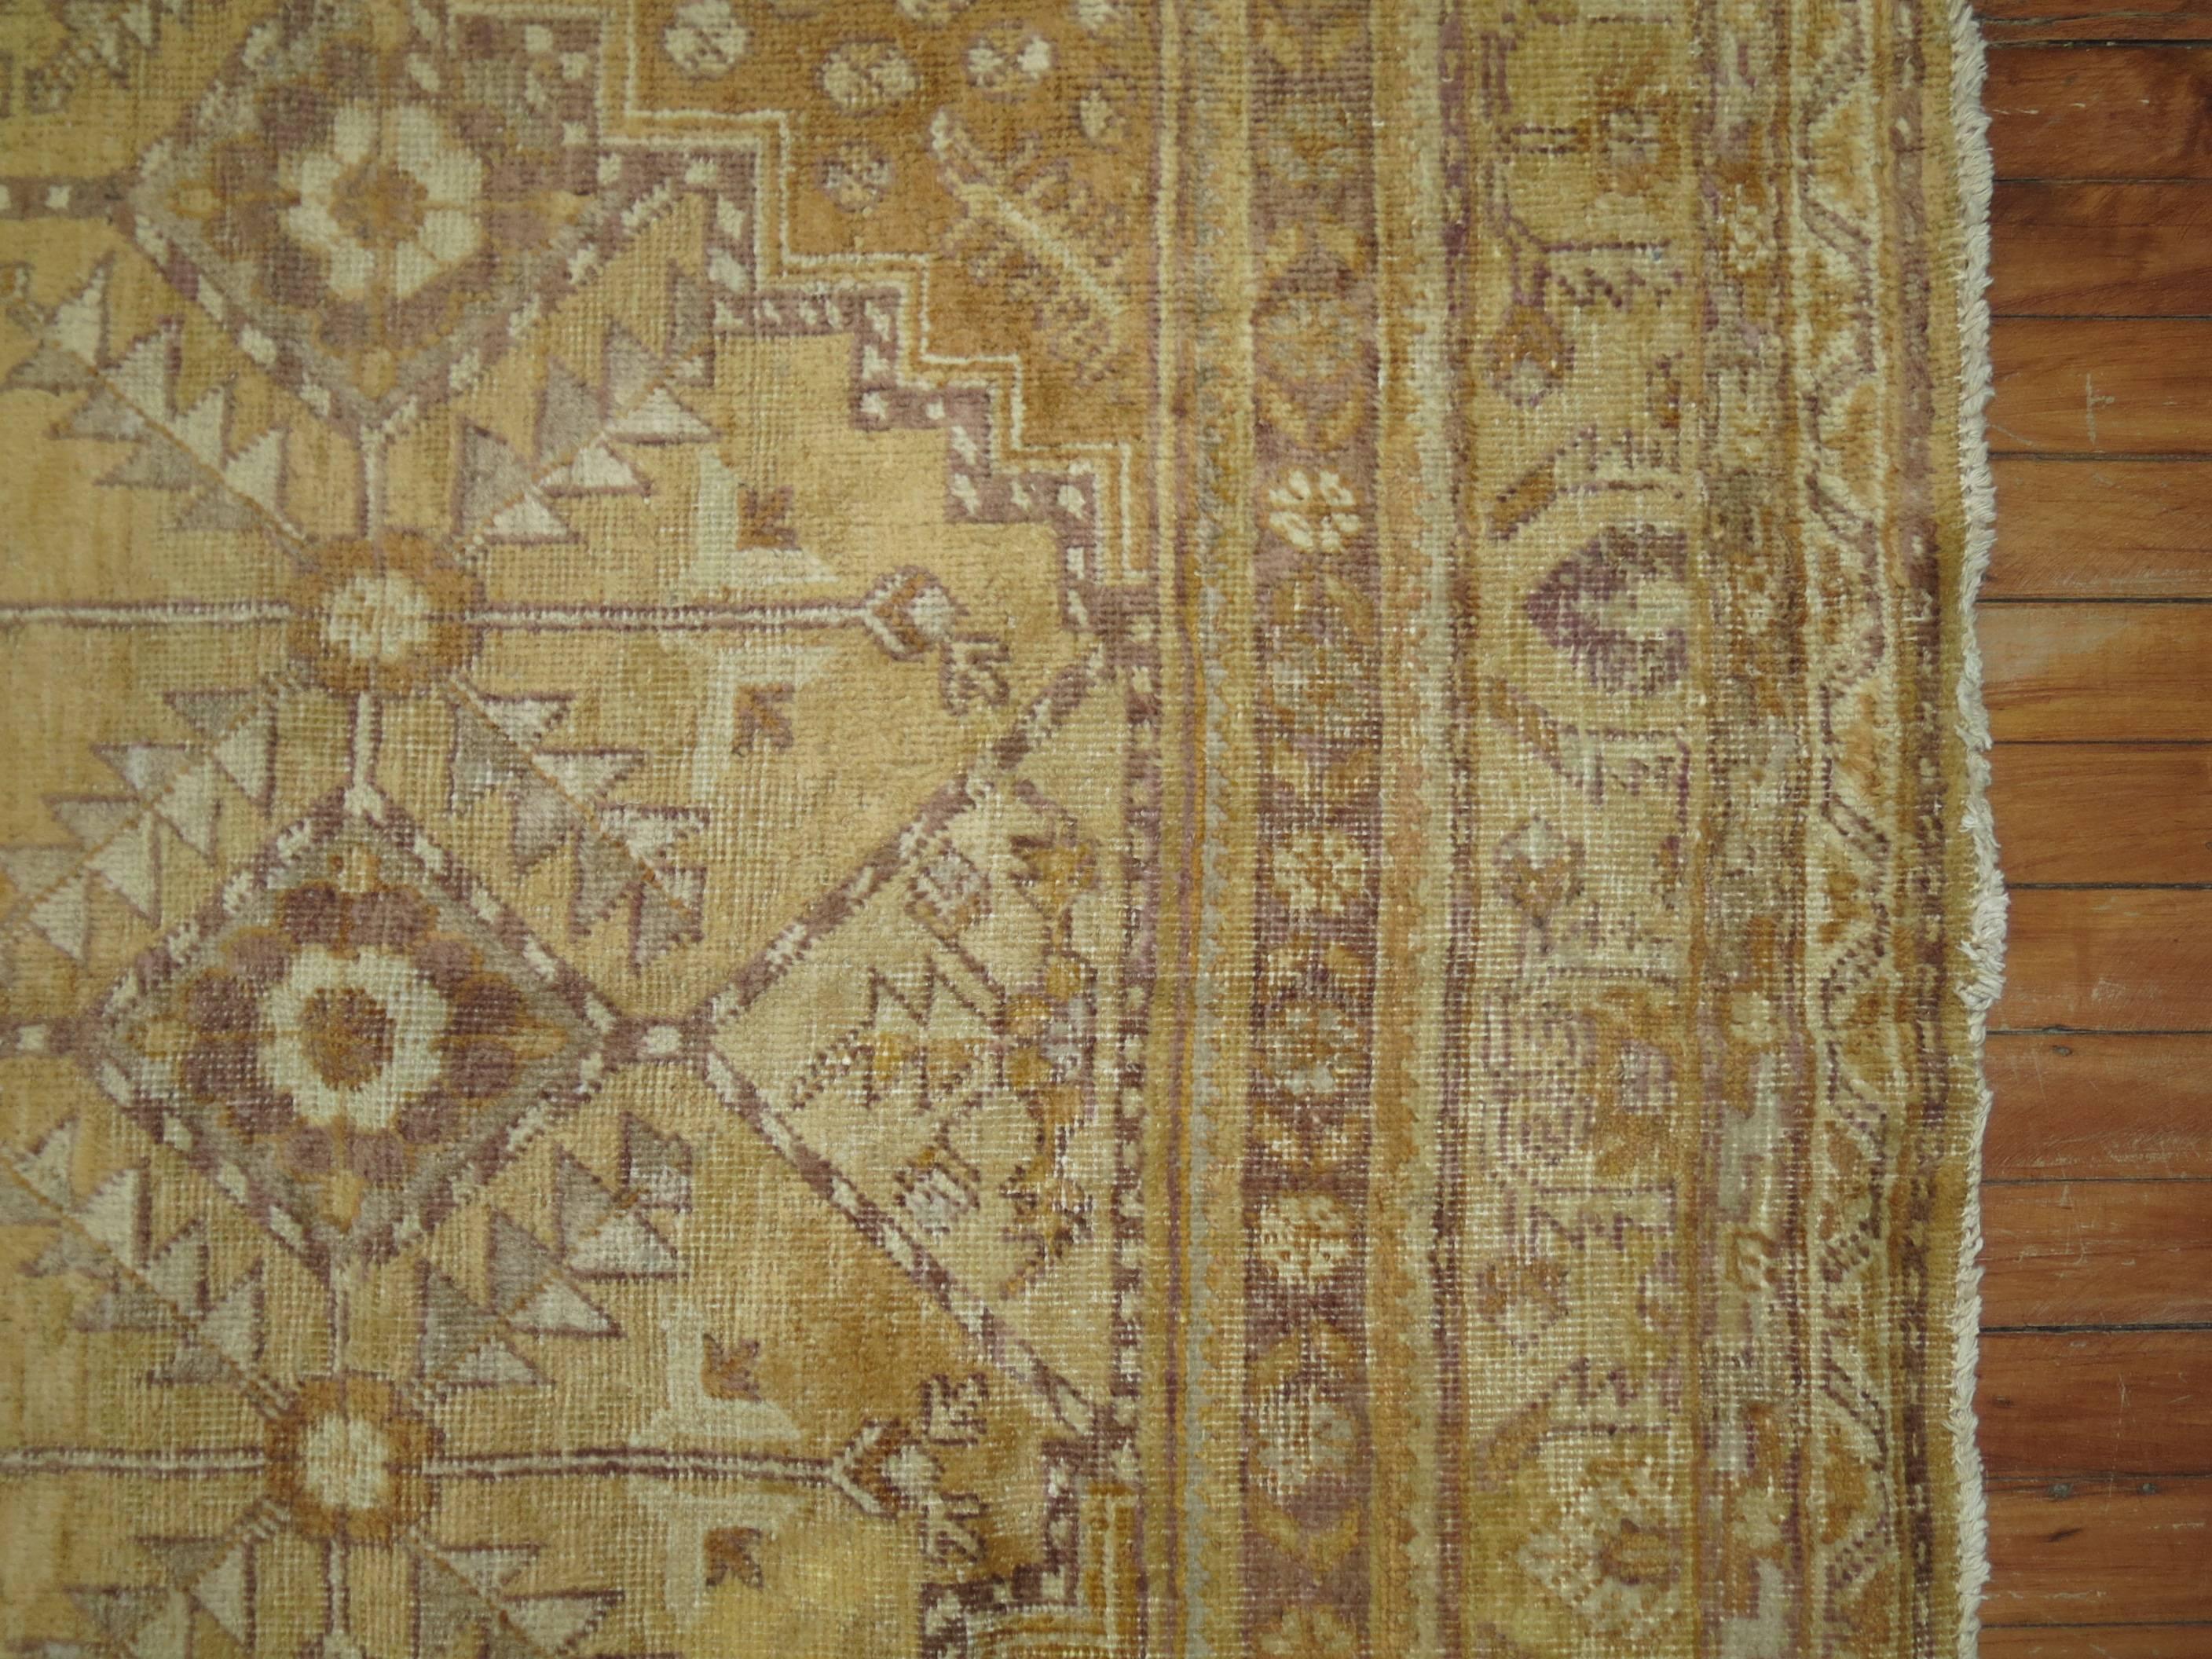 Khotan gallery rug with nice all-over geometric palette in a predominant straw color. Outline colors in ivory and brown

Size: 6'10